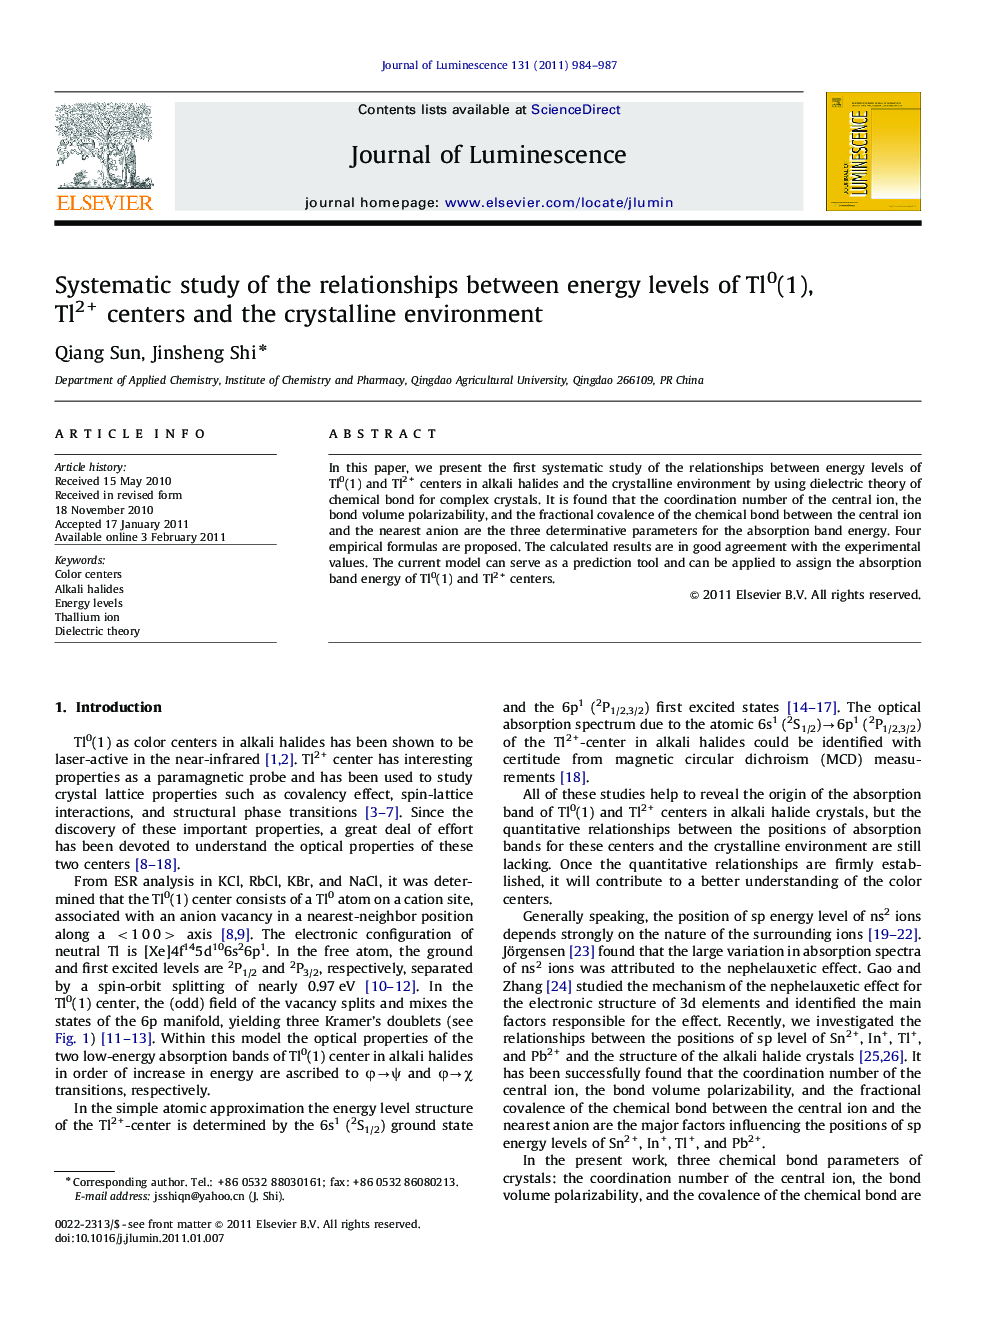 Systematic study of the relationships between energy levels of Tl0(1), Tl2+ centers and the crystalline environment